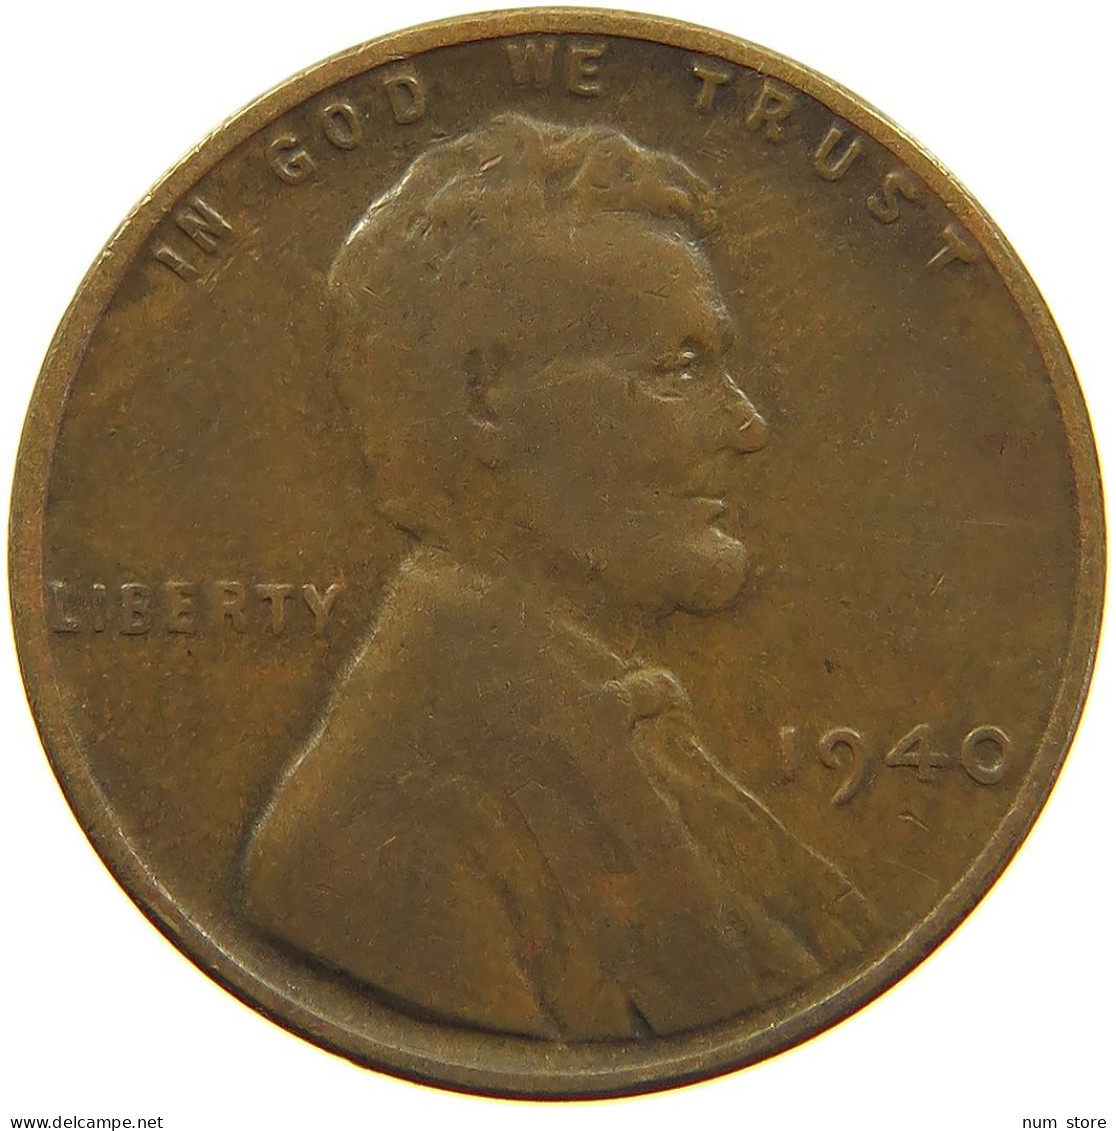 UNITED STATES OF AMERICA CENT 1940 LINCOLN #s091 0303 - 1909-1958: Lincoln, Wheat Ears Reverse